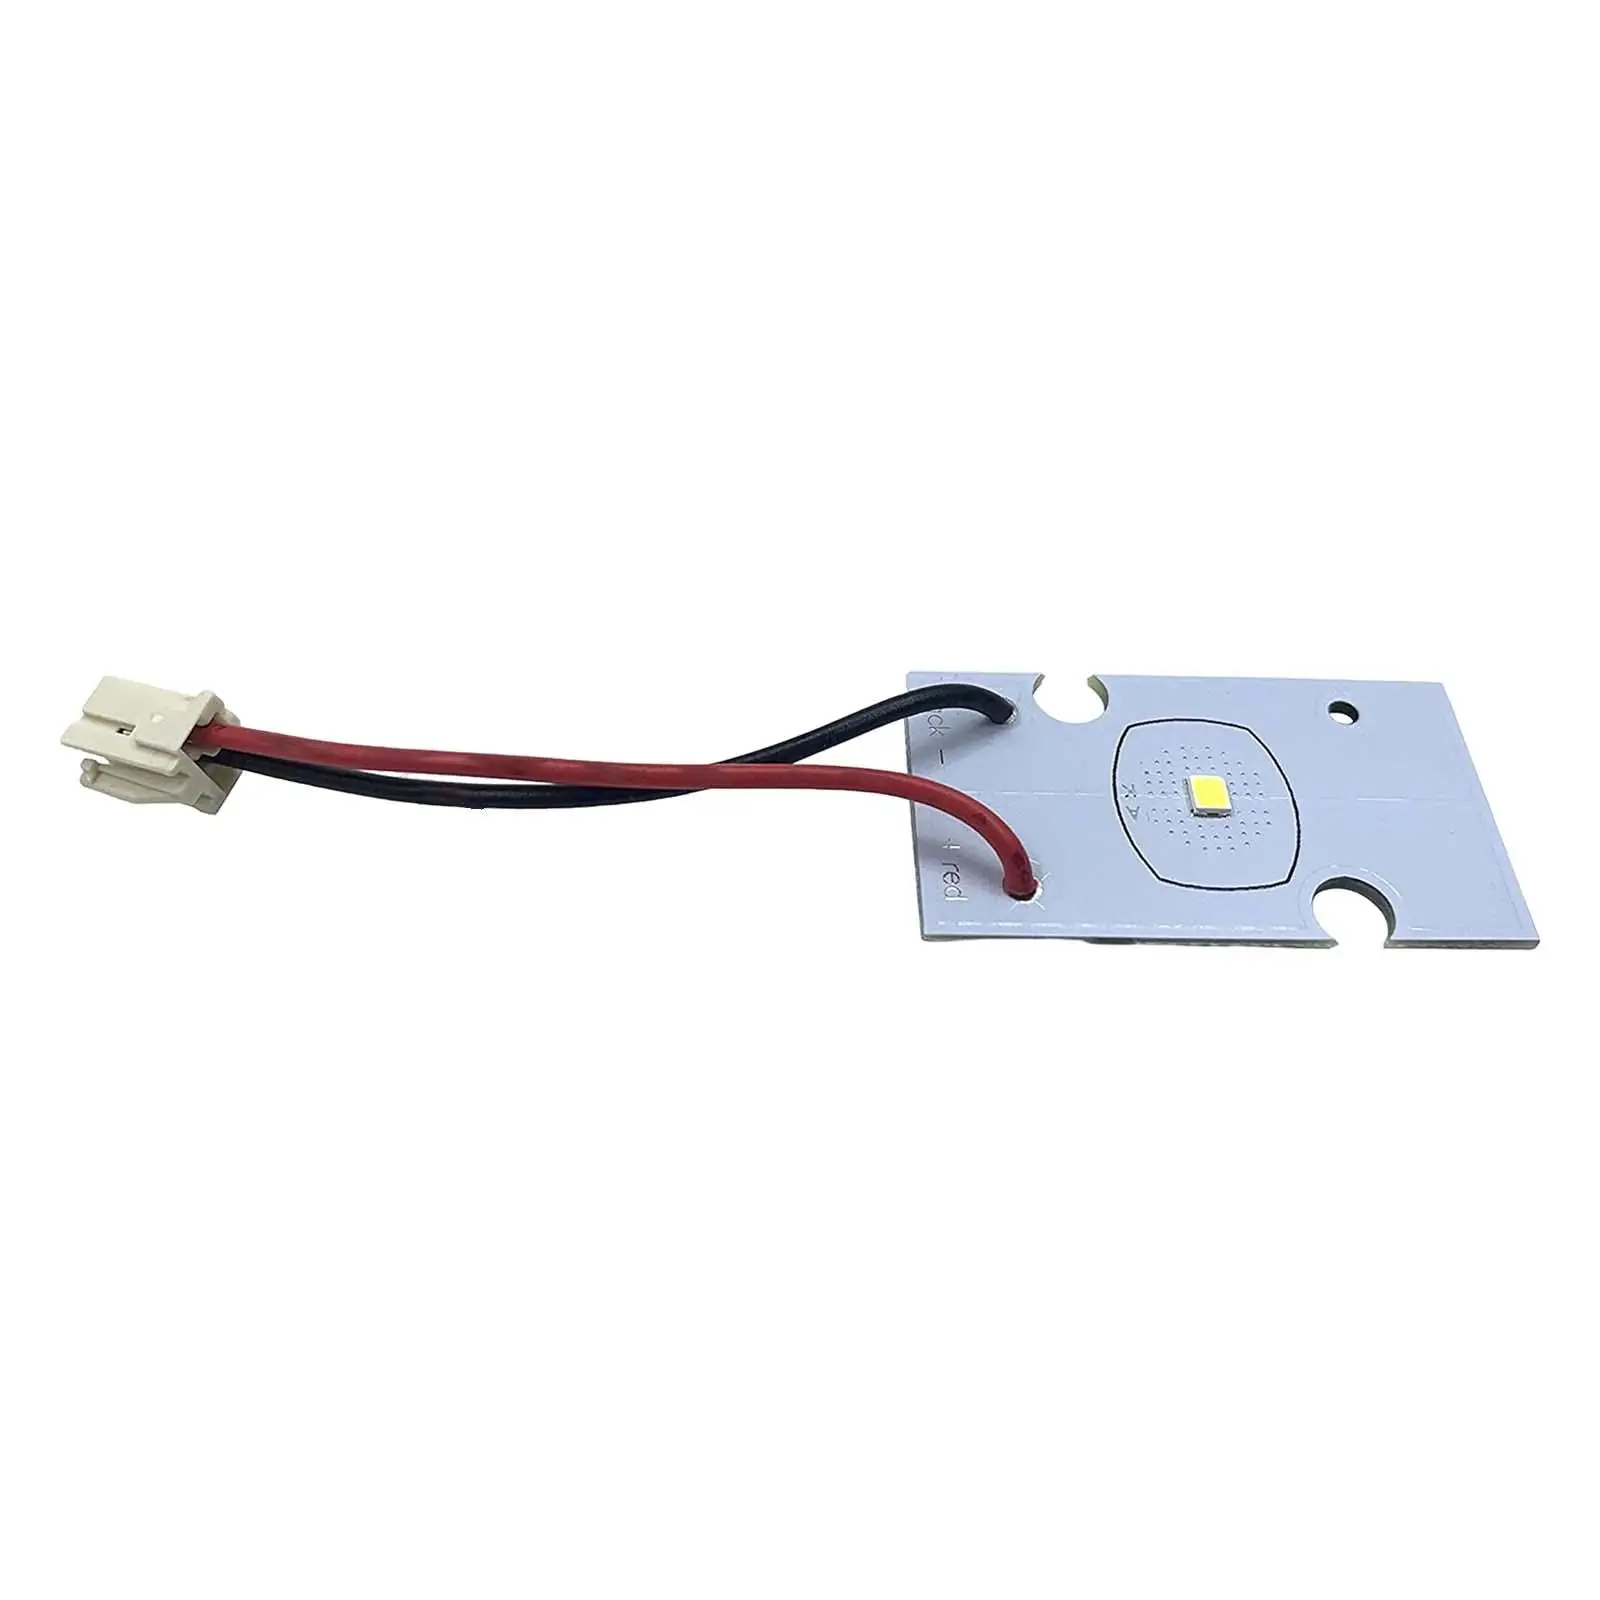 LED Light Easy to Install Portable Parts for Whirlpool Kenmore